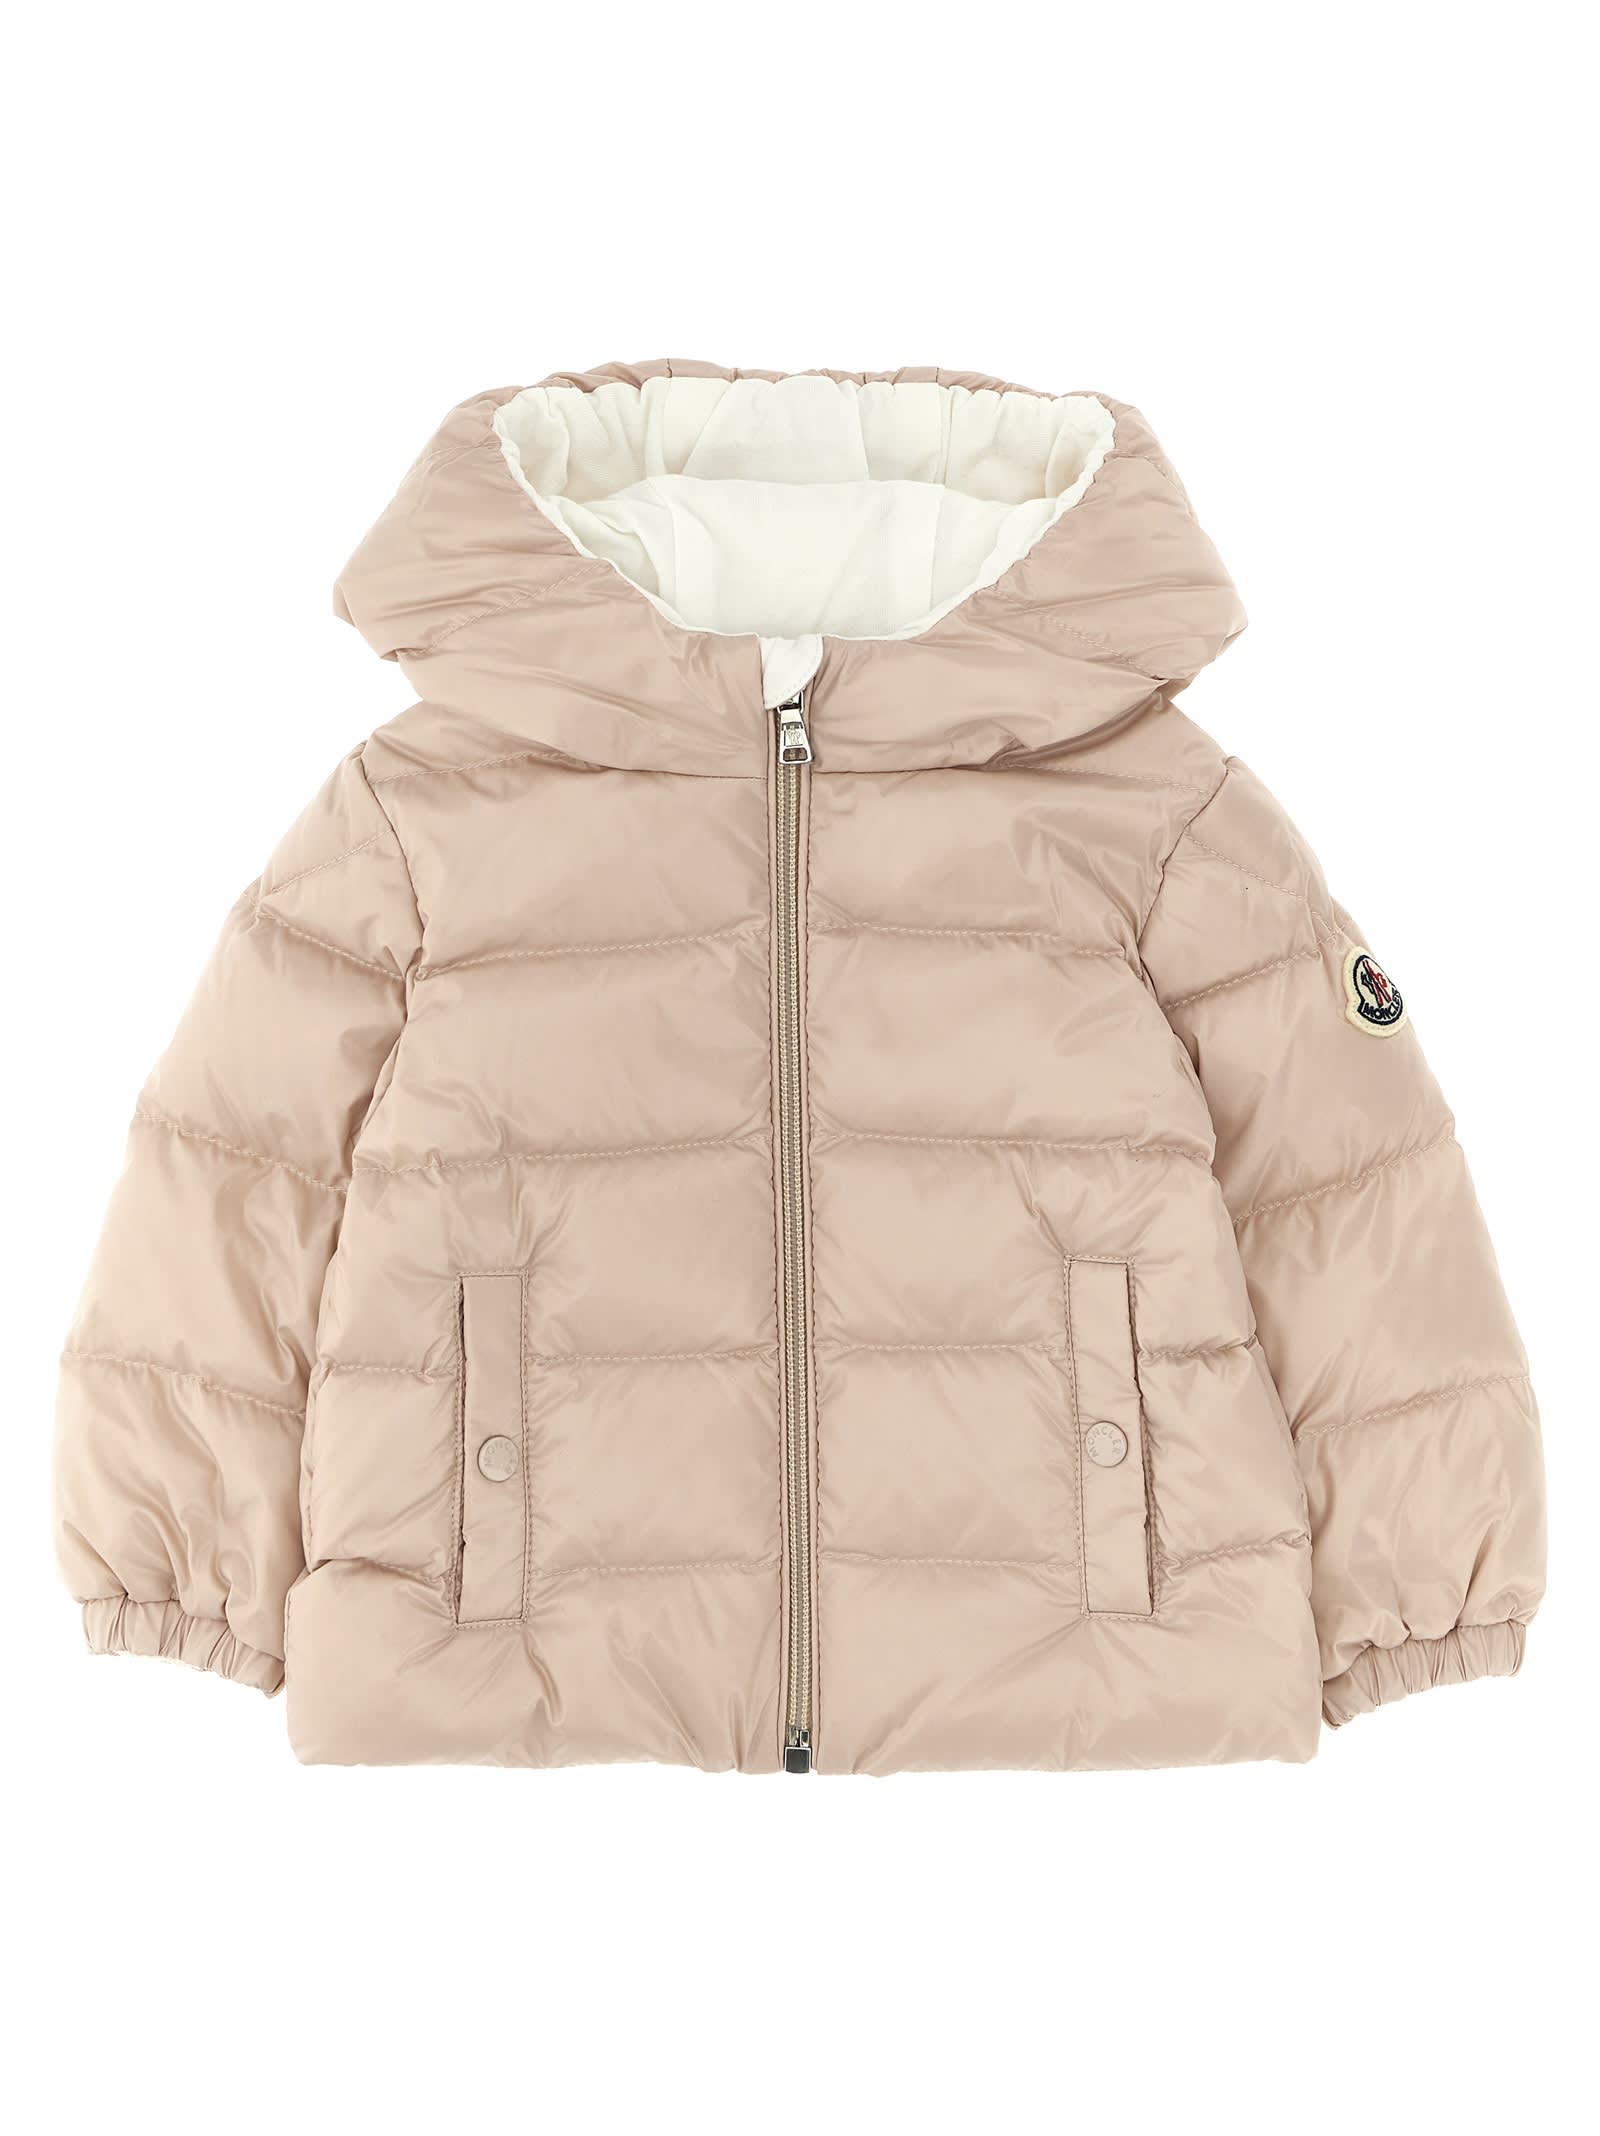 Moncler anand Down Jacket